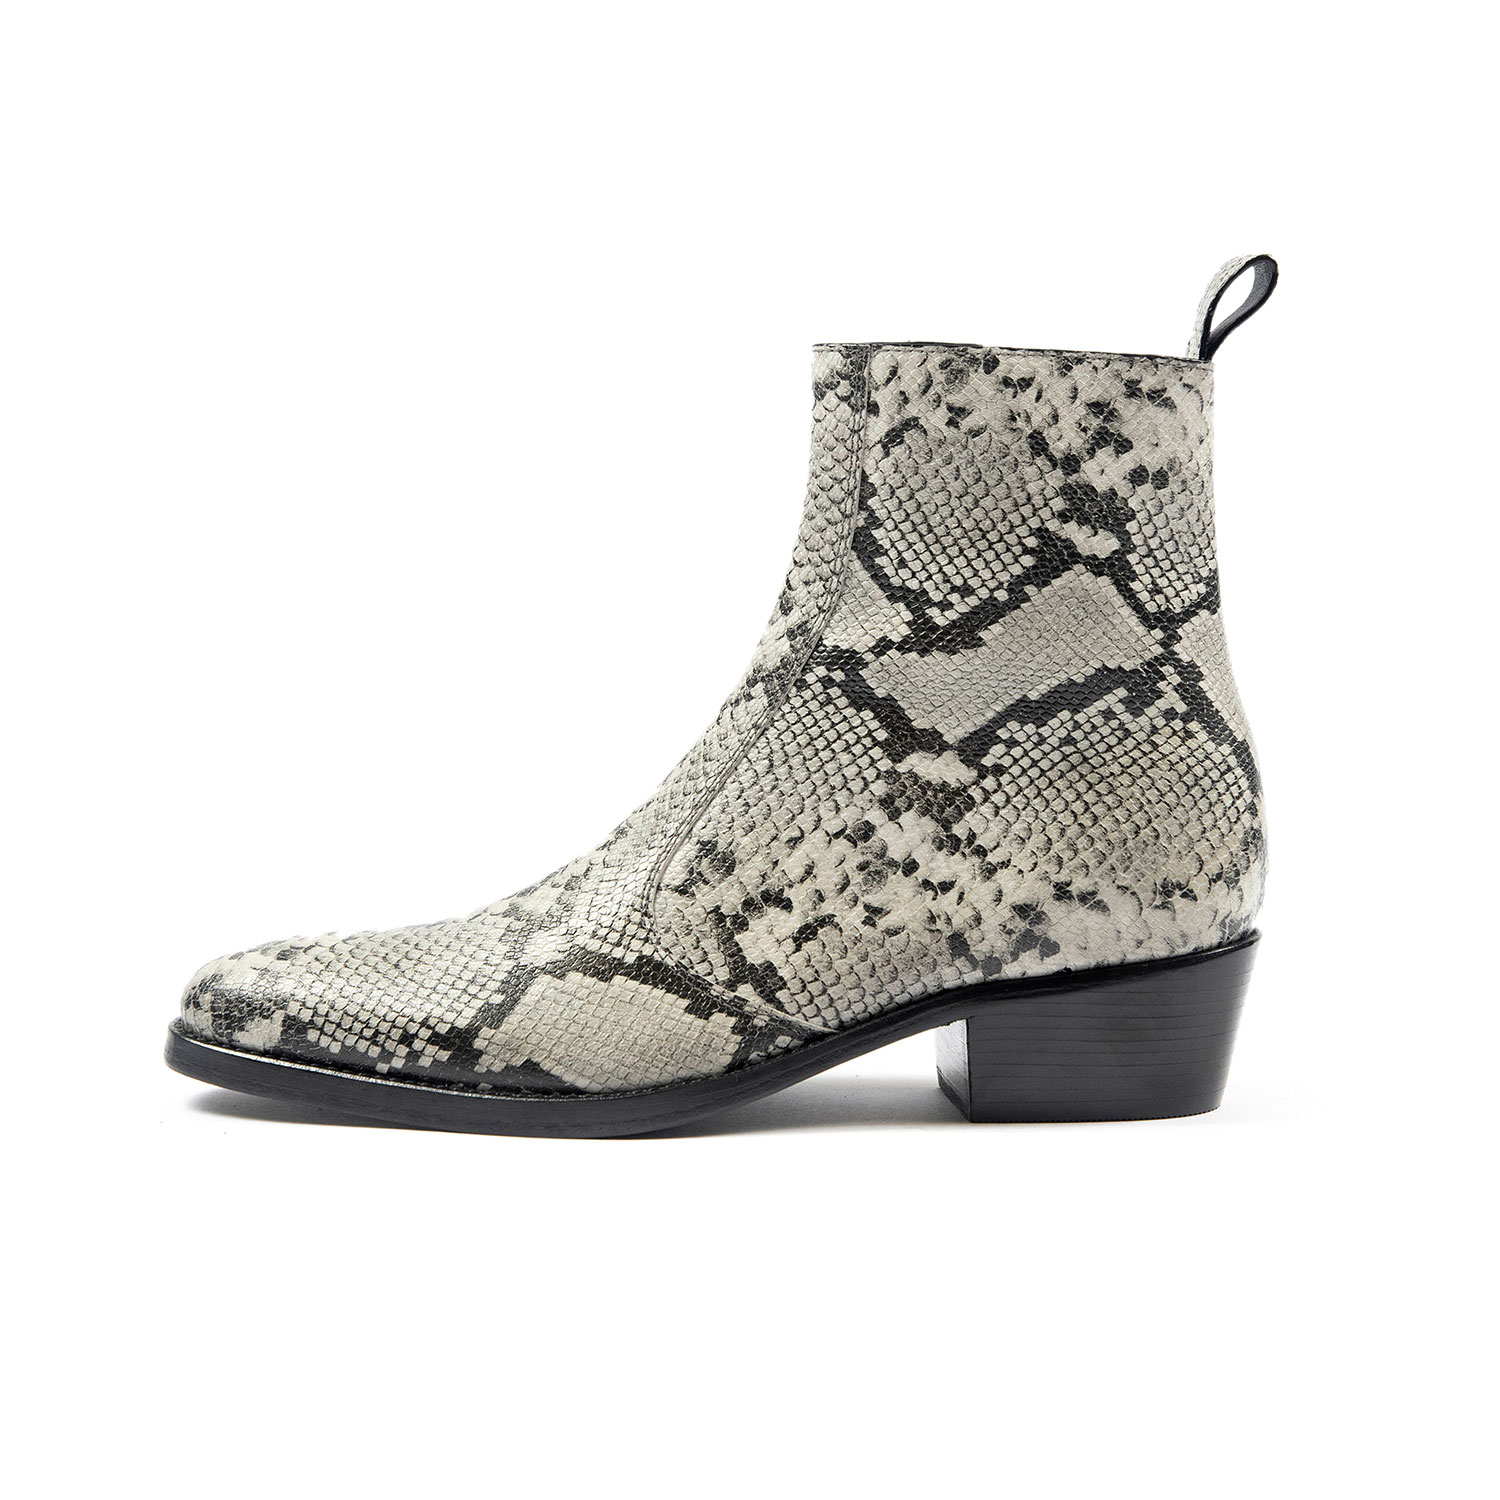 Richards - Grey Snakeskin (Size 5.5, 6.5, 7.5, 9.5) | Straight To Hell ...